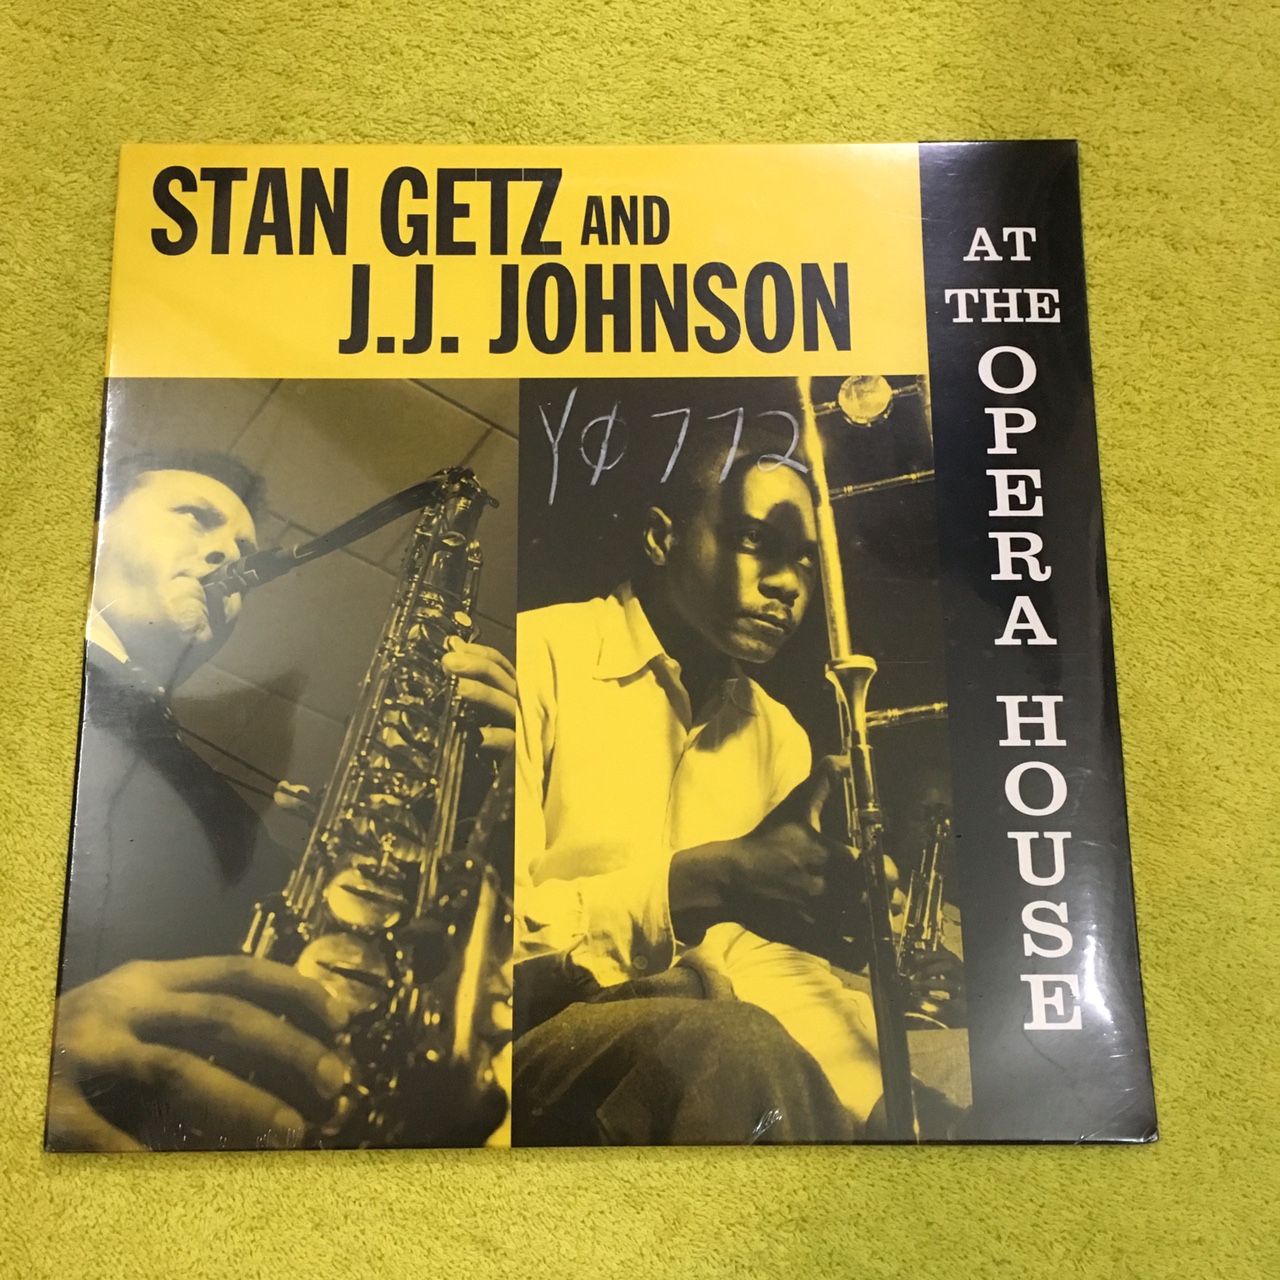 stan-getz-and-j-j-johnson-at-the-opera-house